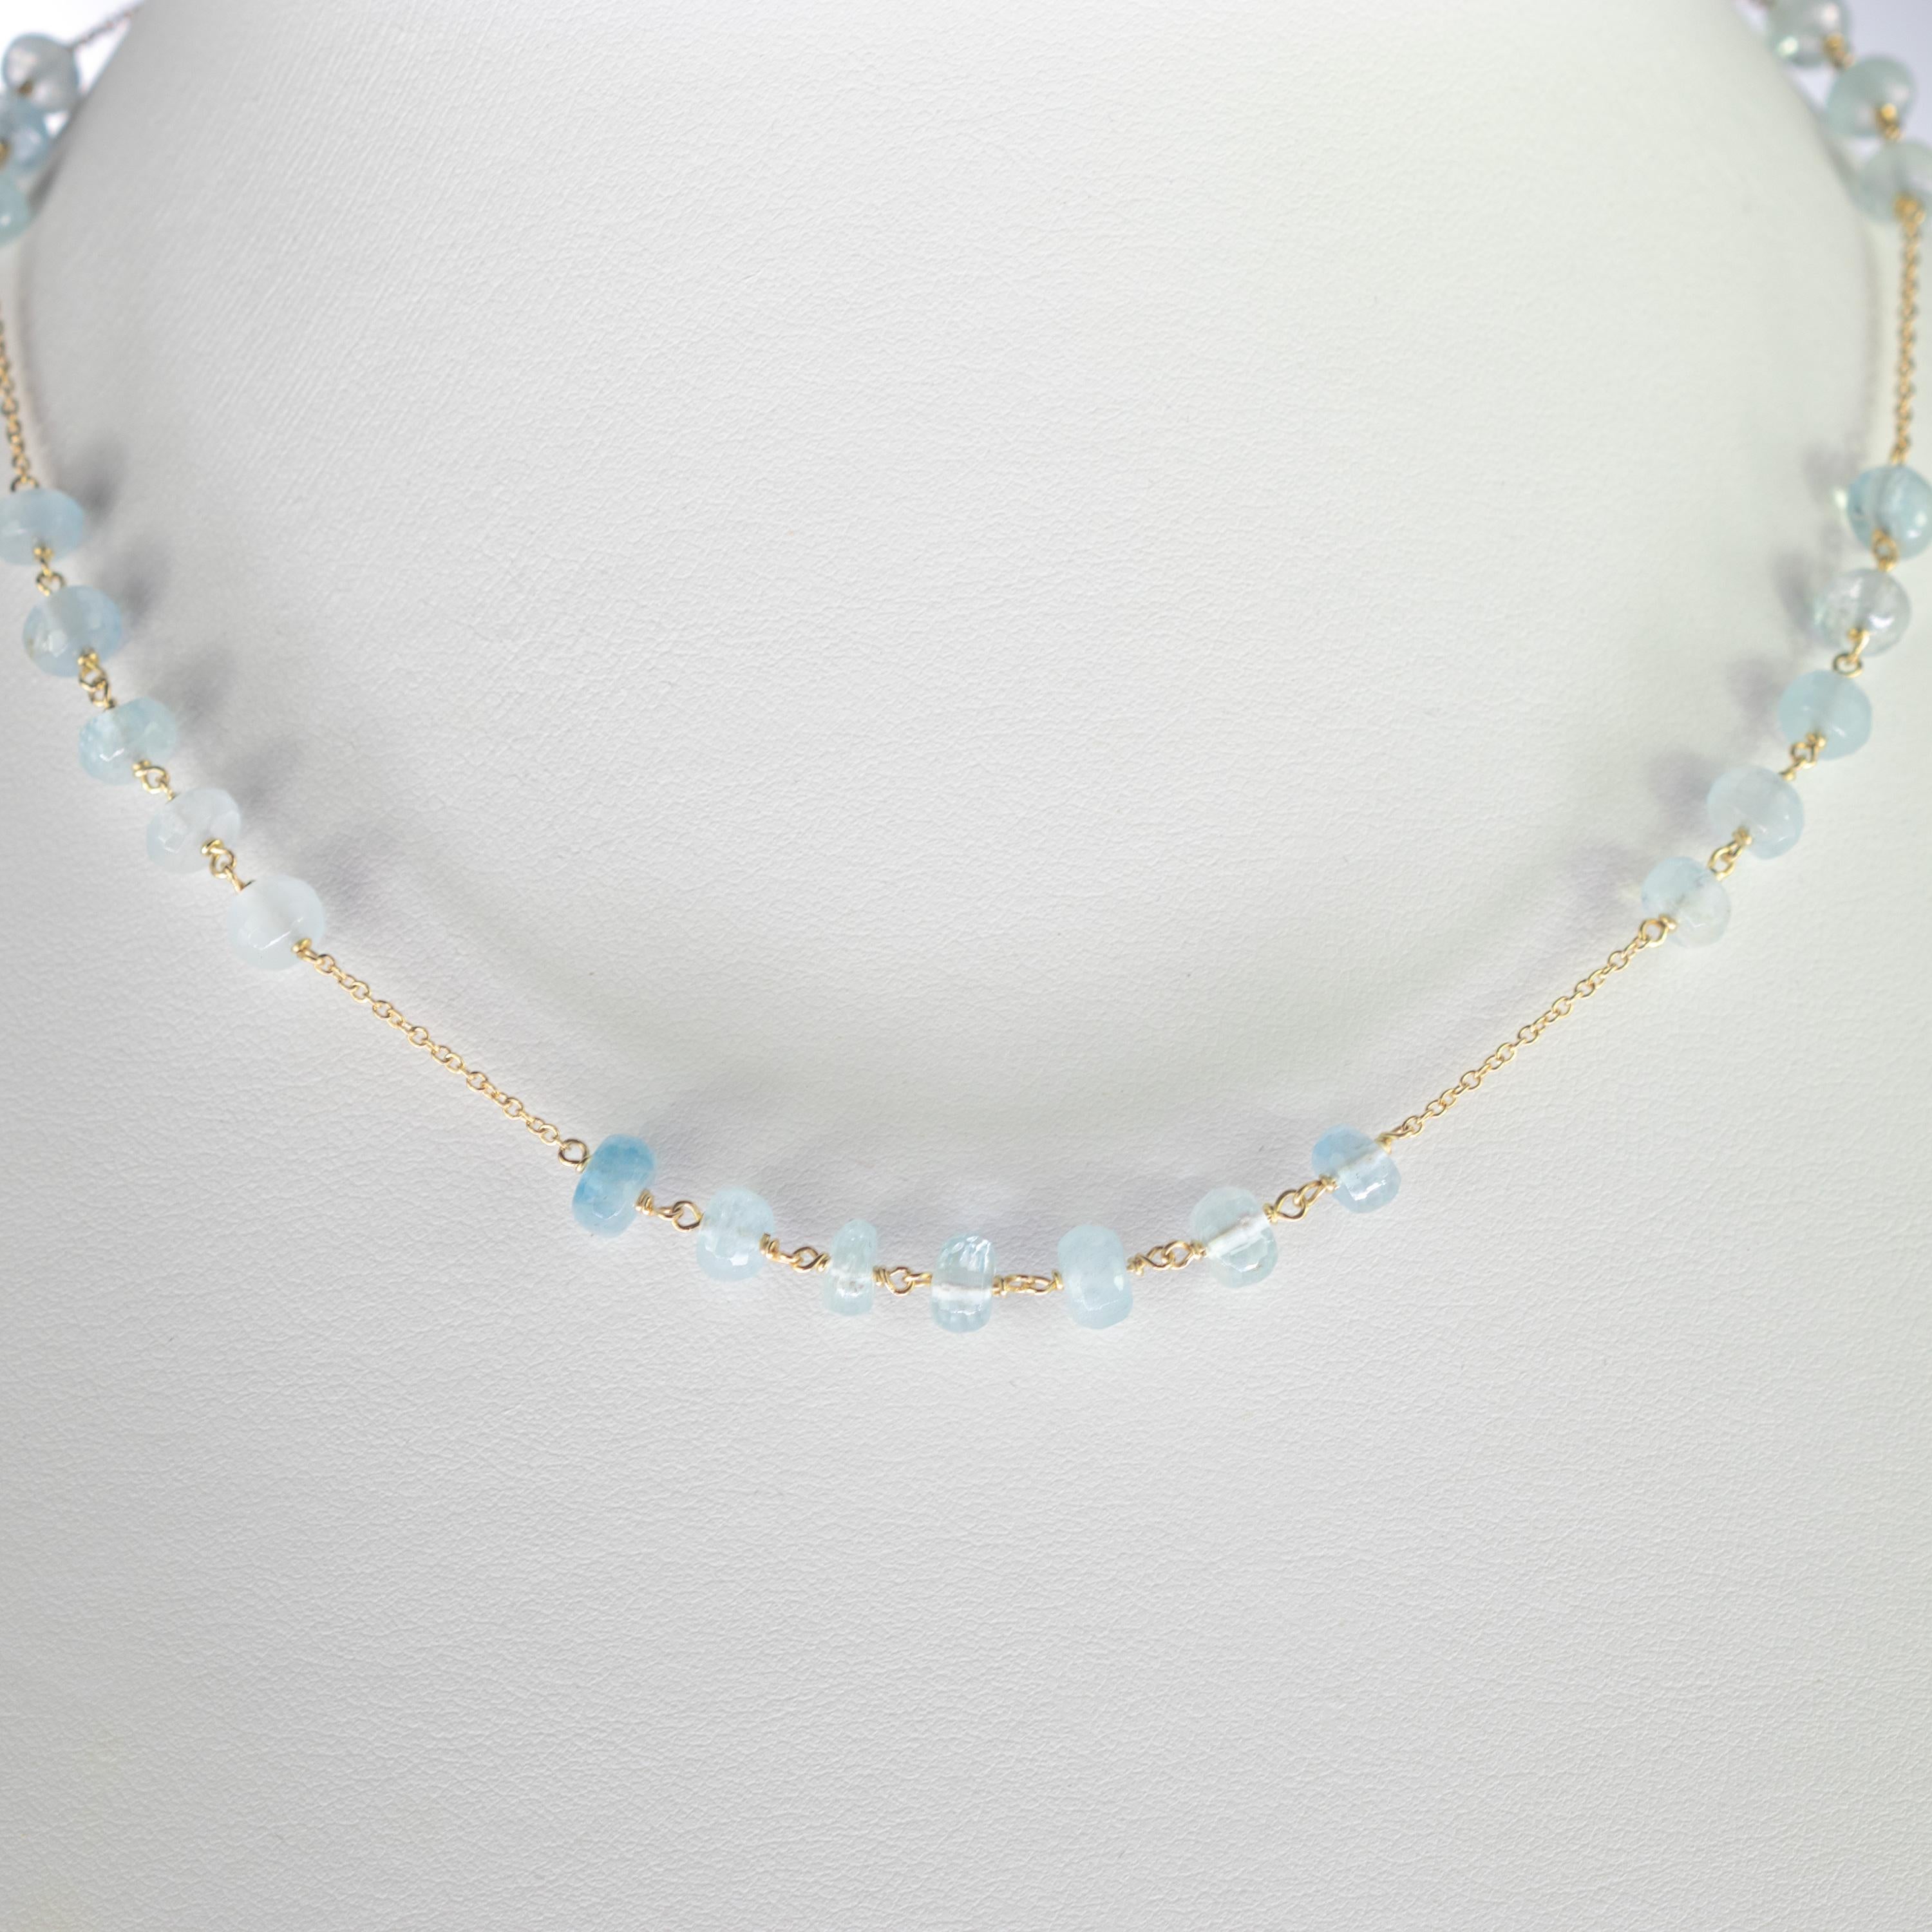 Luminous set of natural precious jewellery on elegant Gold Plate setting. Marvellous necklace earrings and bracelet starring pure aquamarine raw rondelles, for a bright charm of uniqueness.
 
An elegant touch of glamour at your fingertips. Let